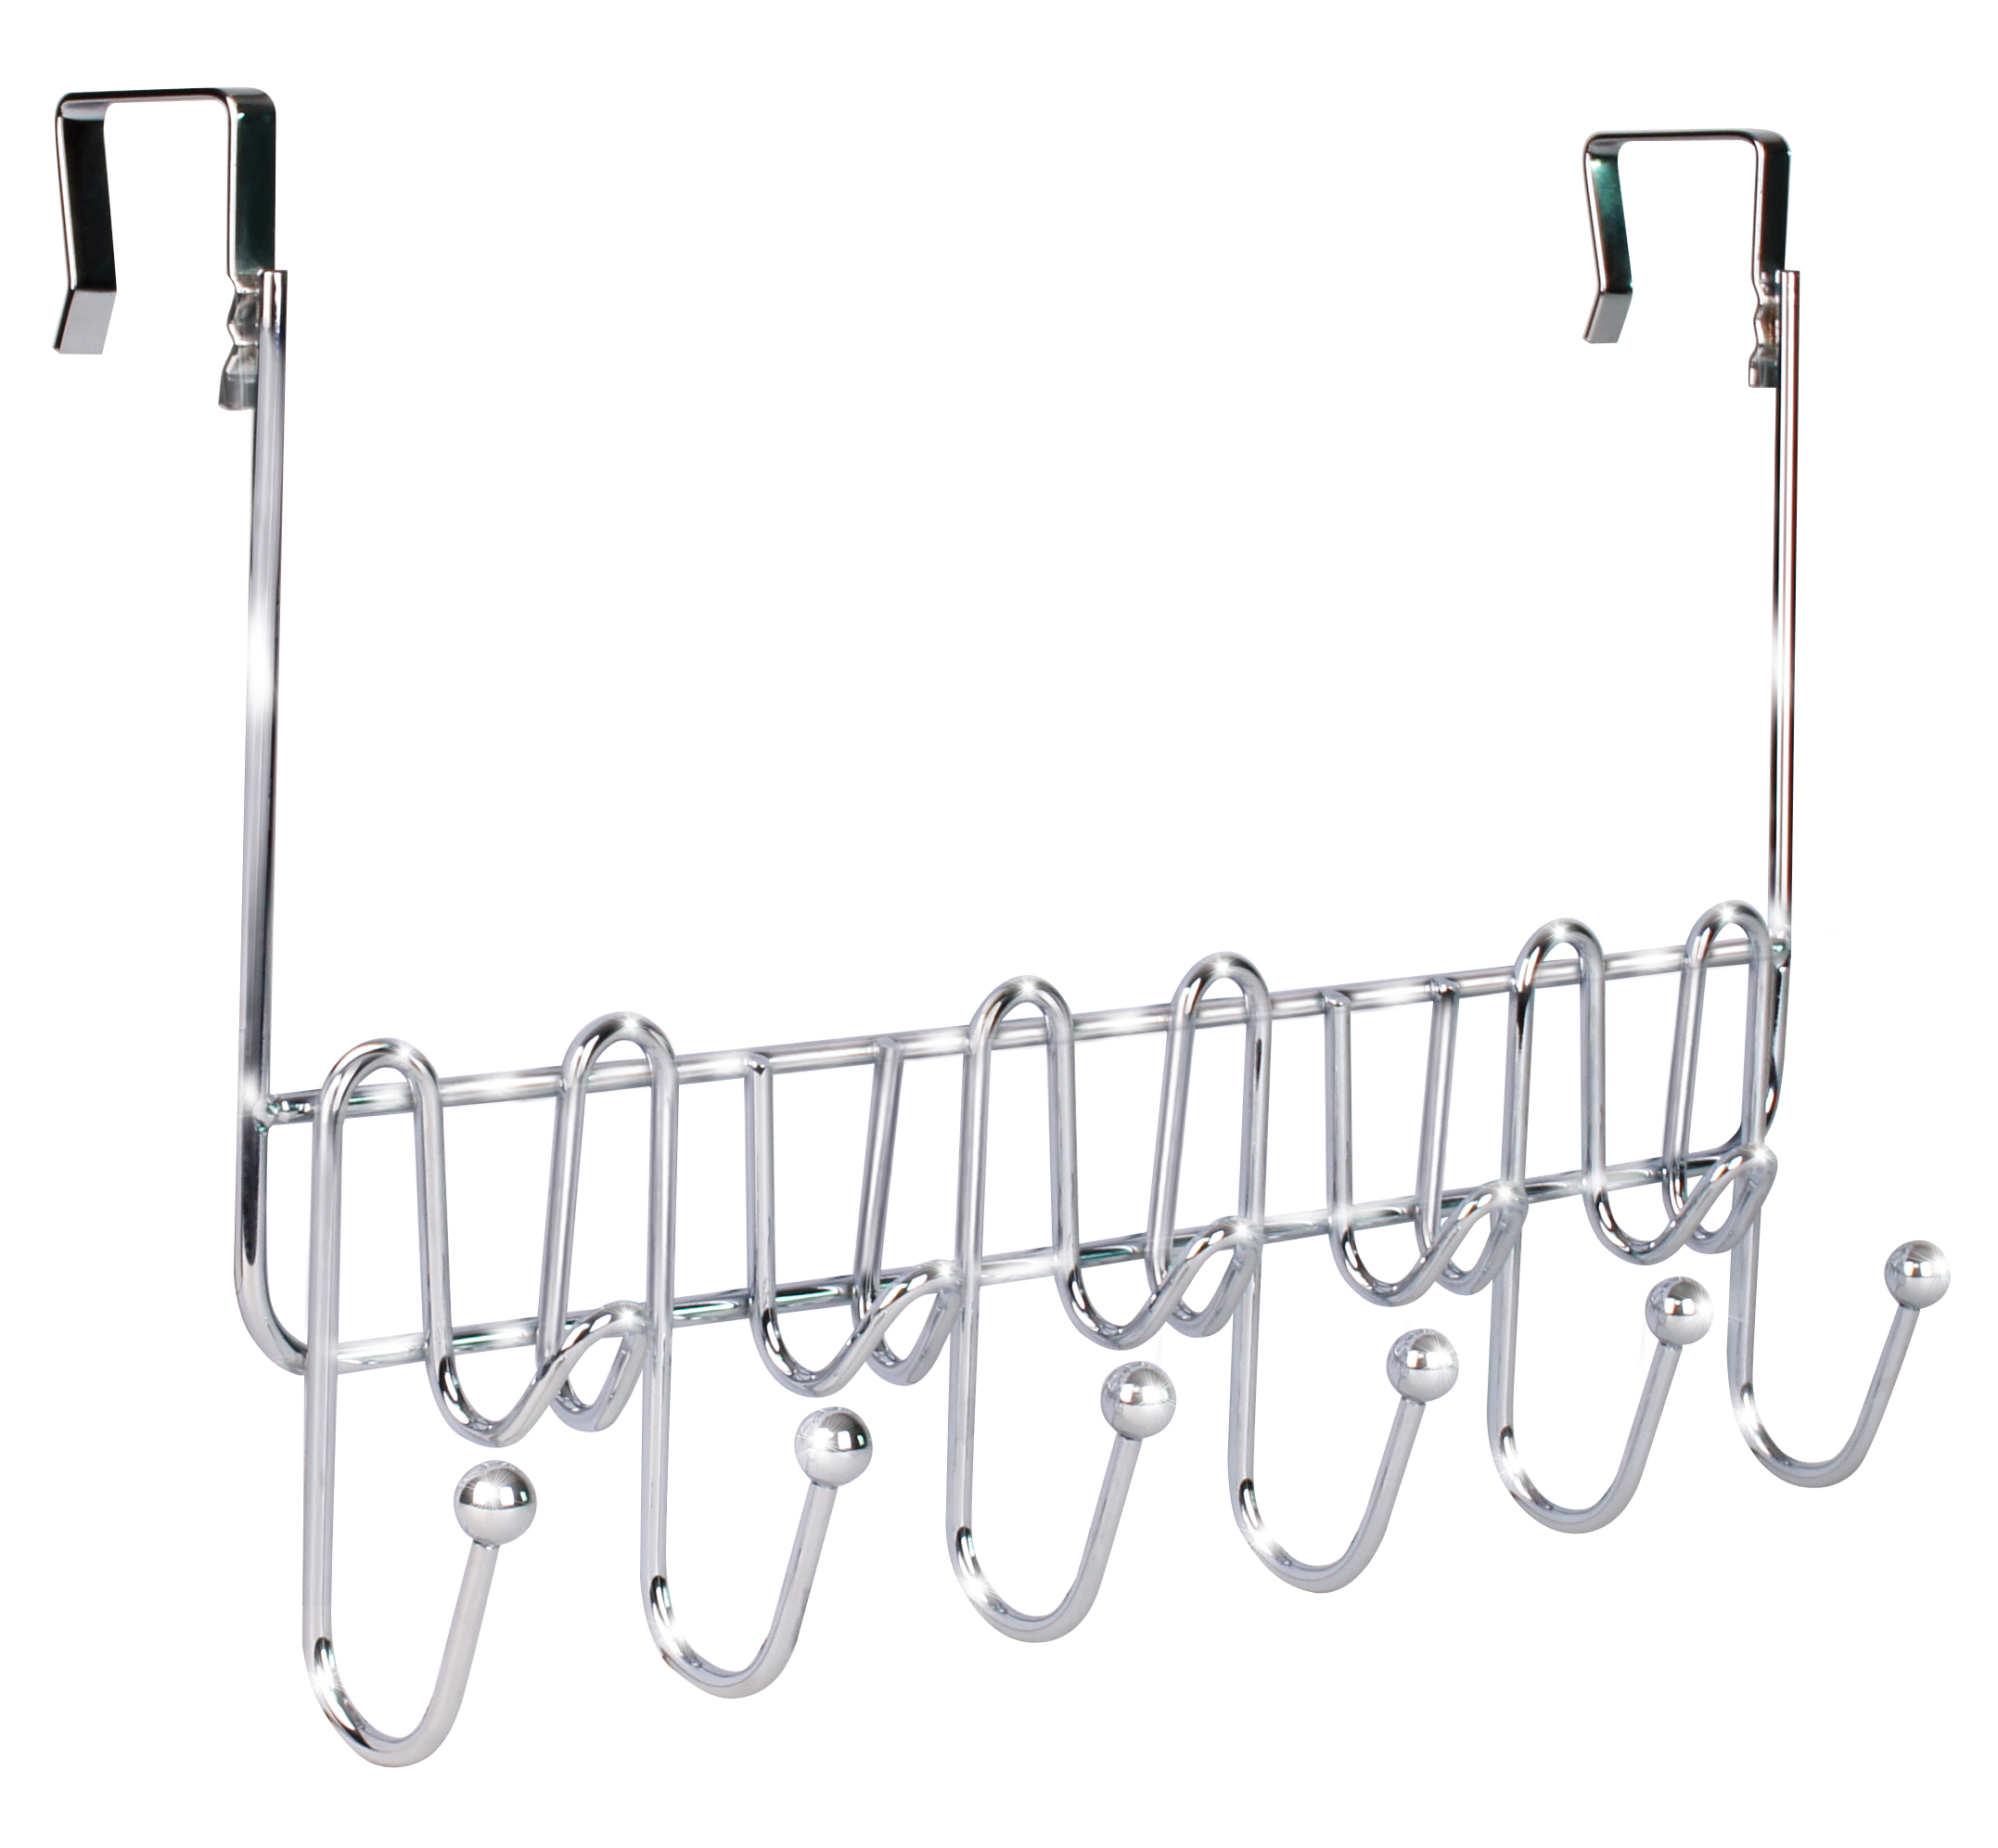 Deco Brothers Stackable Cabinet Shelf Organizer, 2 Pack, Chrome